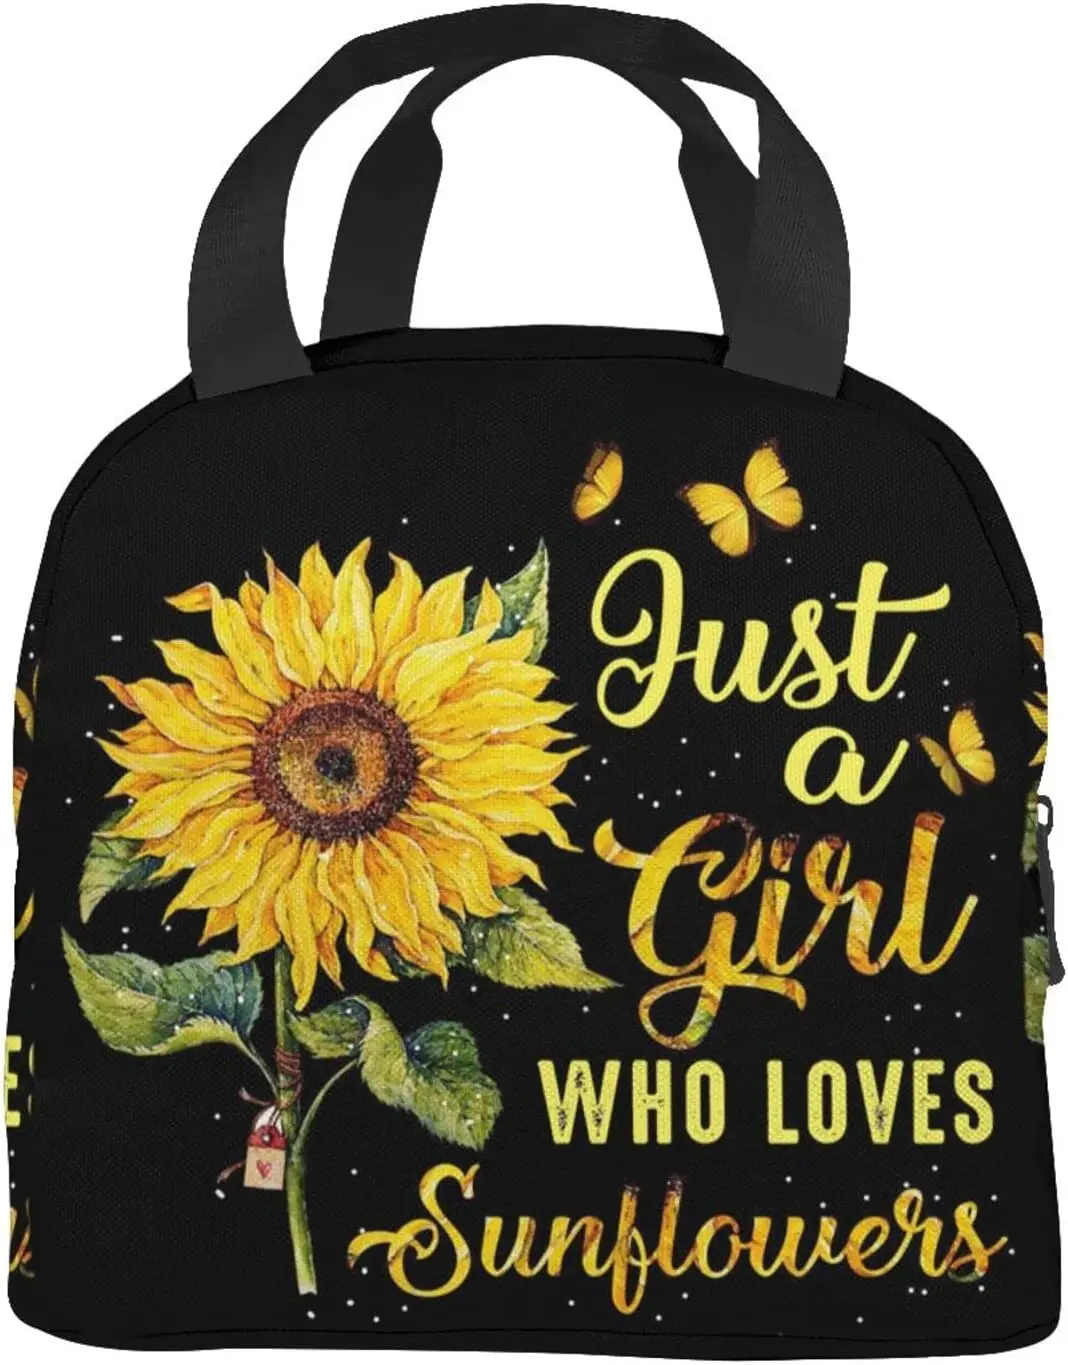 

Sunflower Insulated Lunch Bag For Women Just A Girl Who Loves Sunflowers Reusable Lunch Box Men Food Containers Portable Cooler